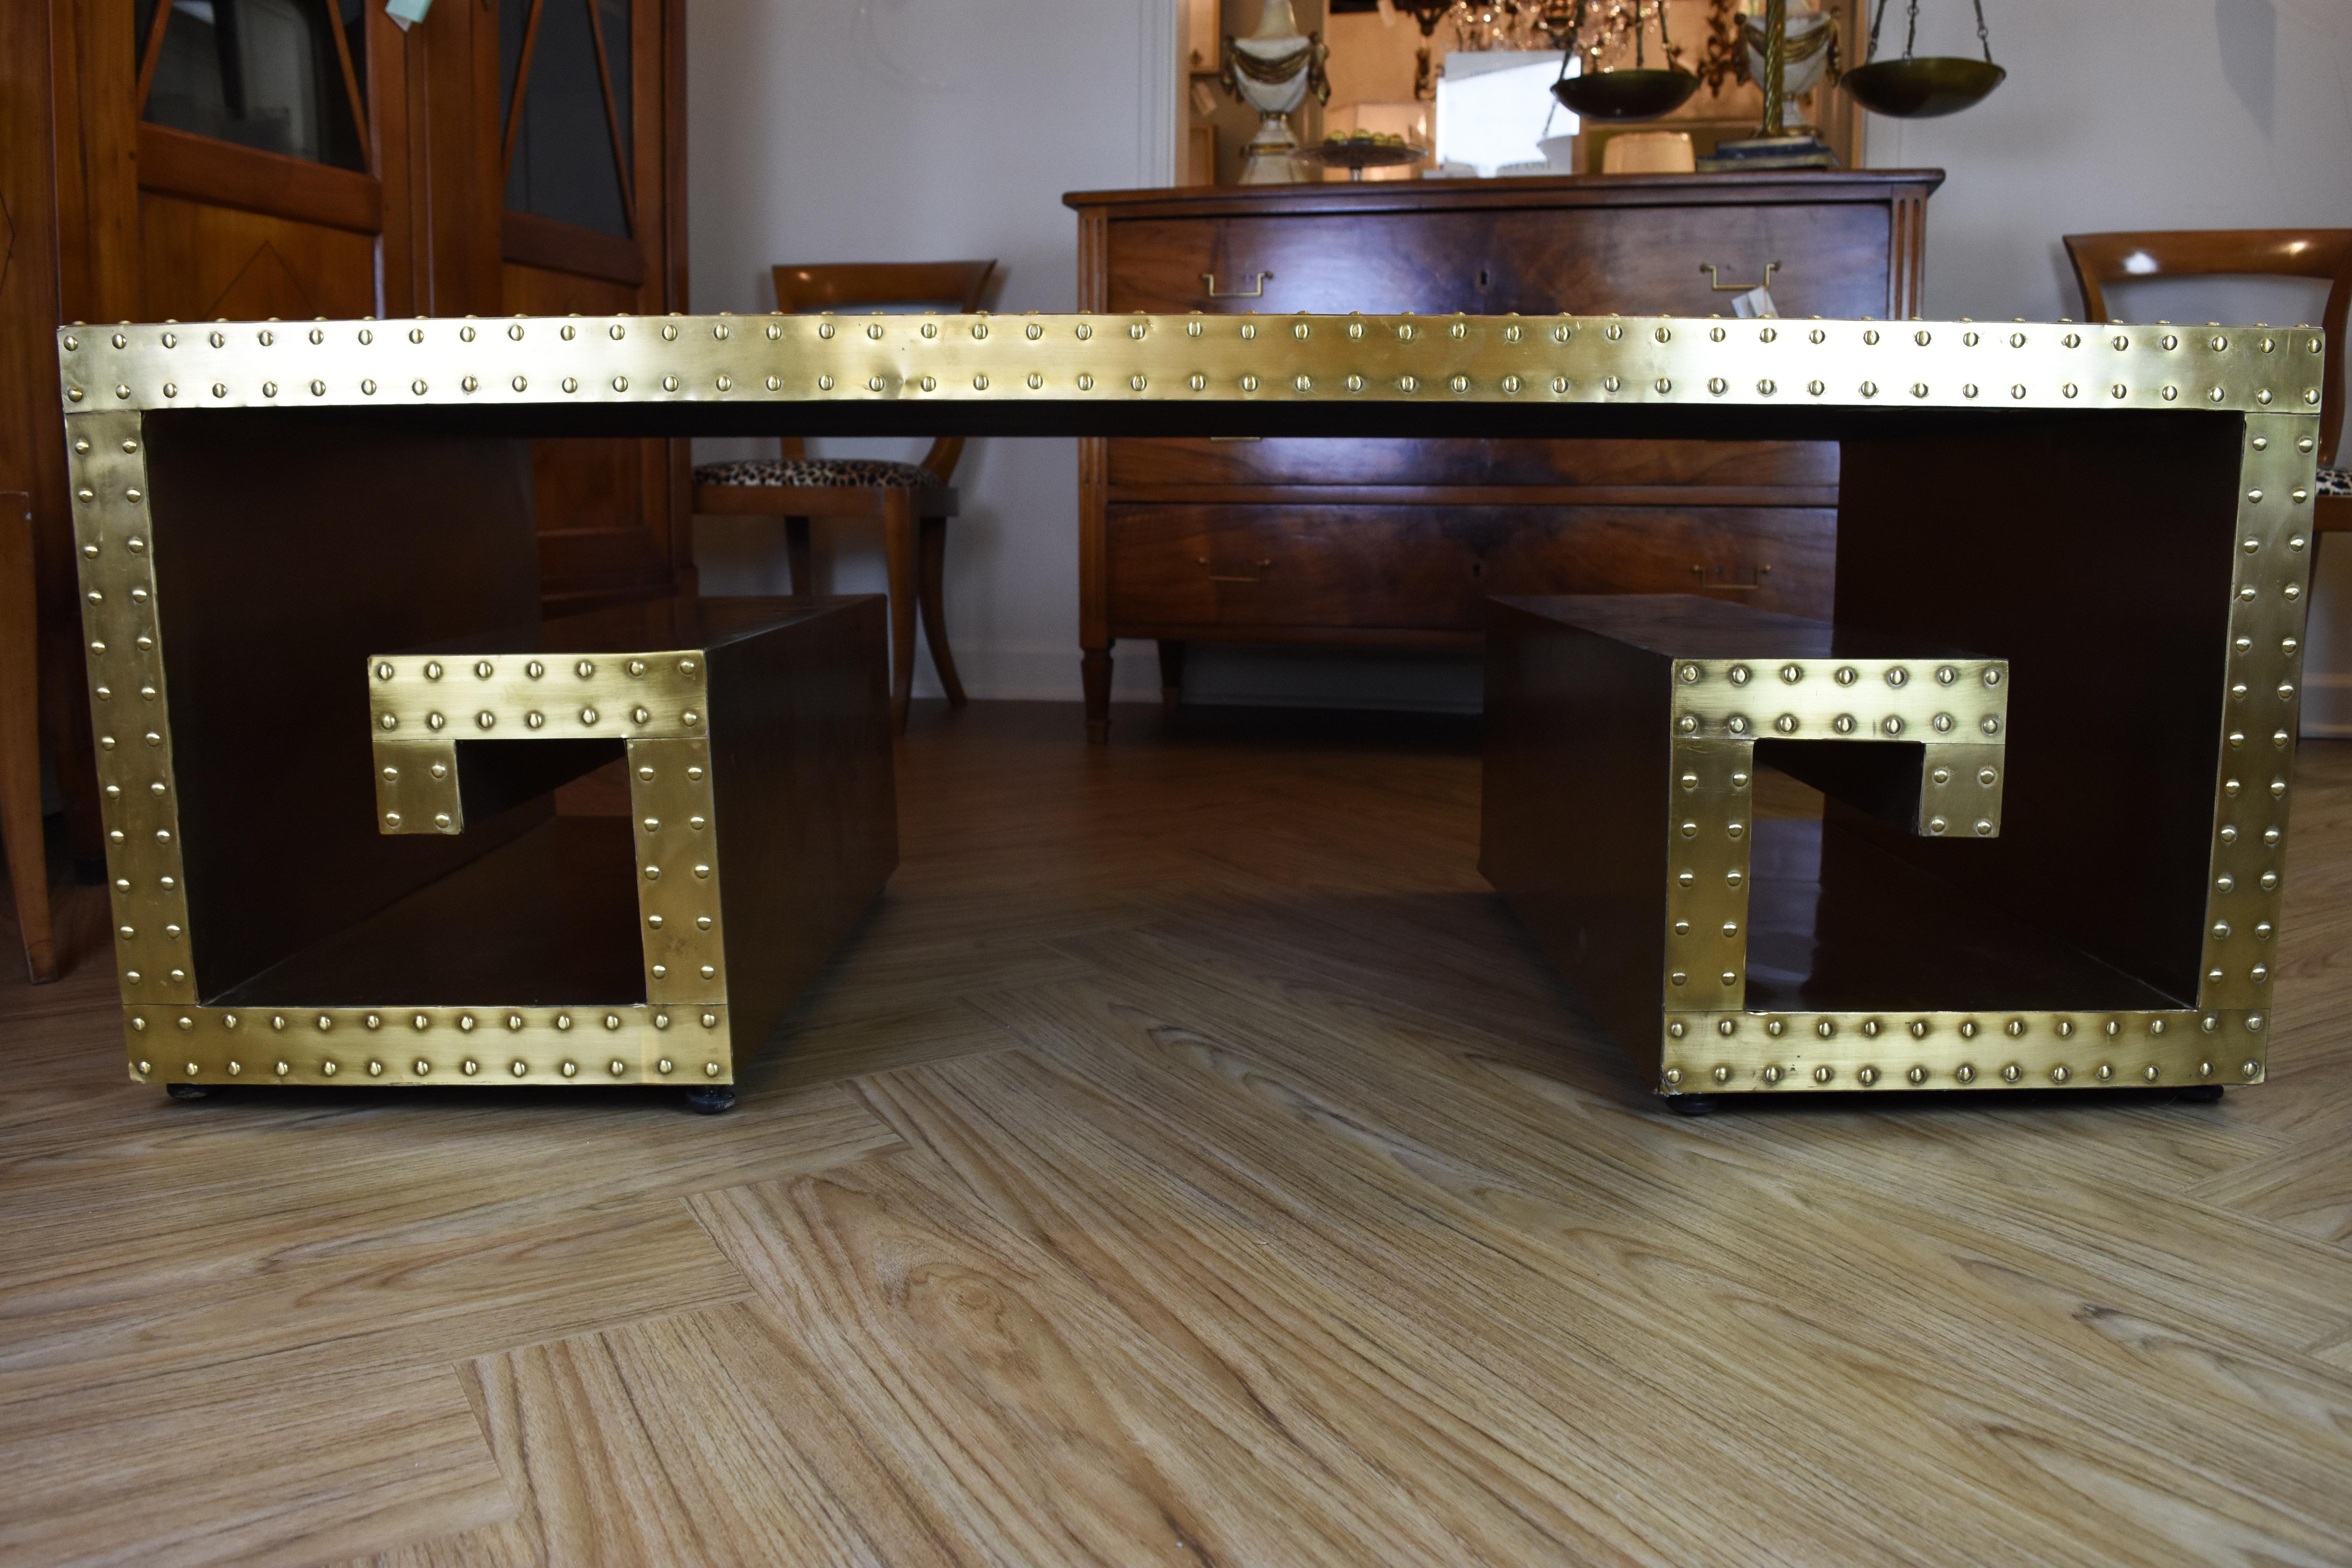 This vintage studded brass clad coffee table features a Greek key design. The top has several dents or imperfections but in no way diminishes the overall look of this striking piece.